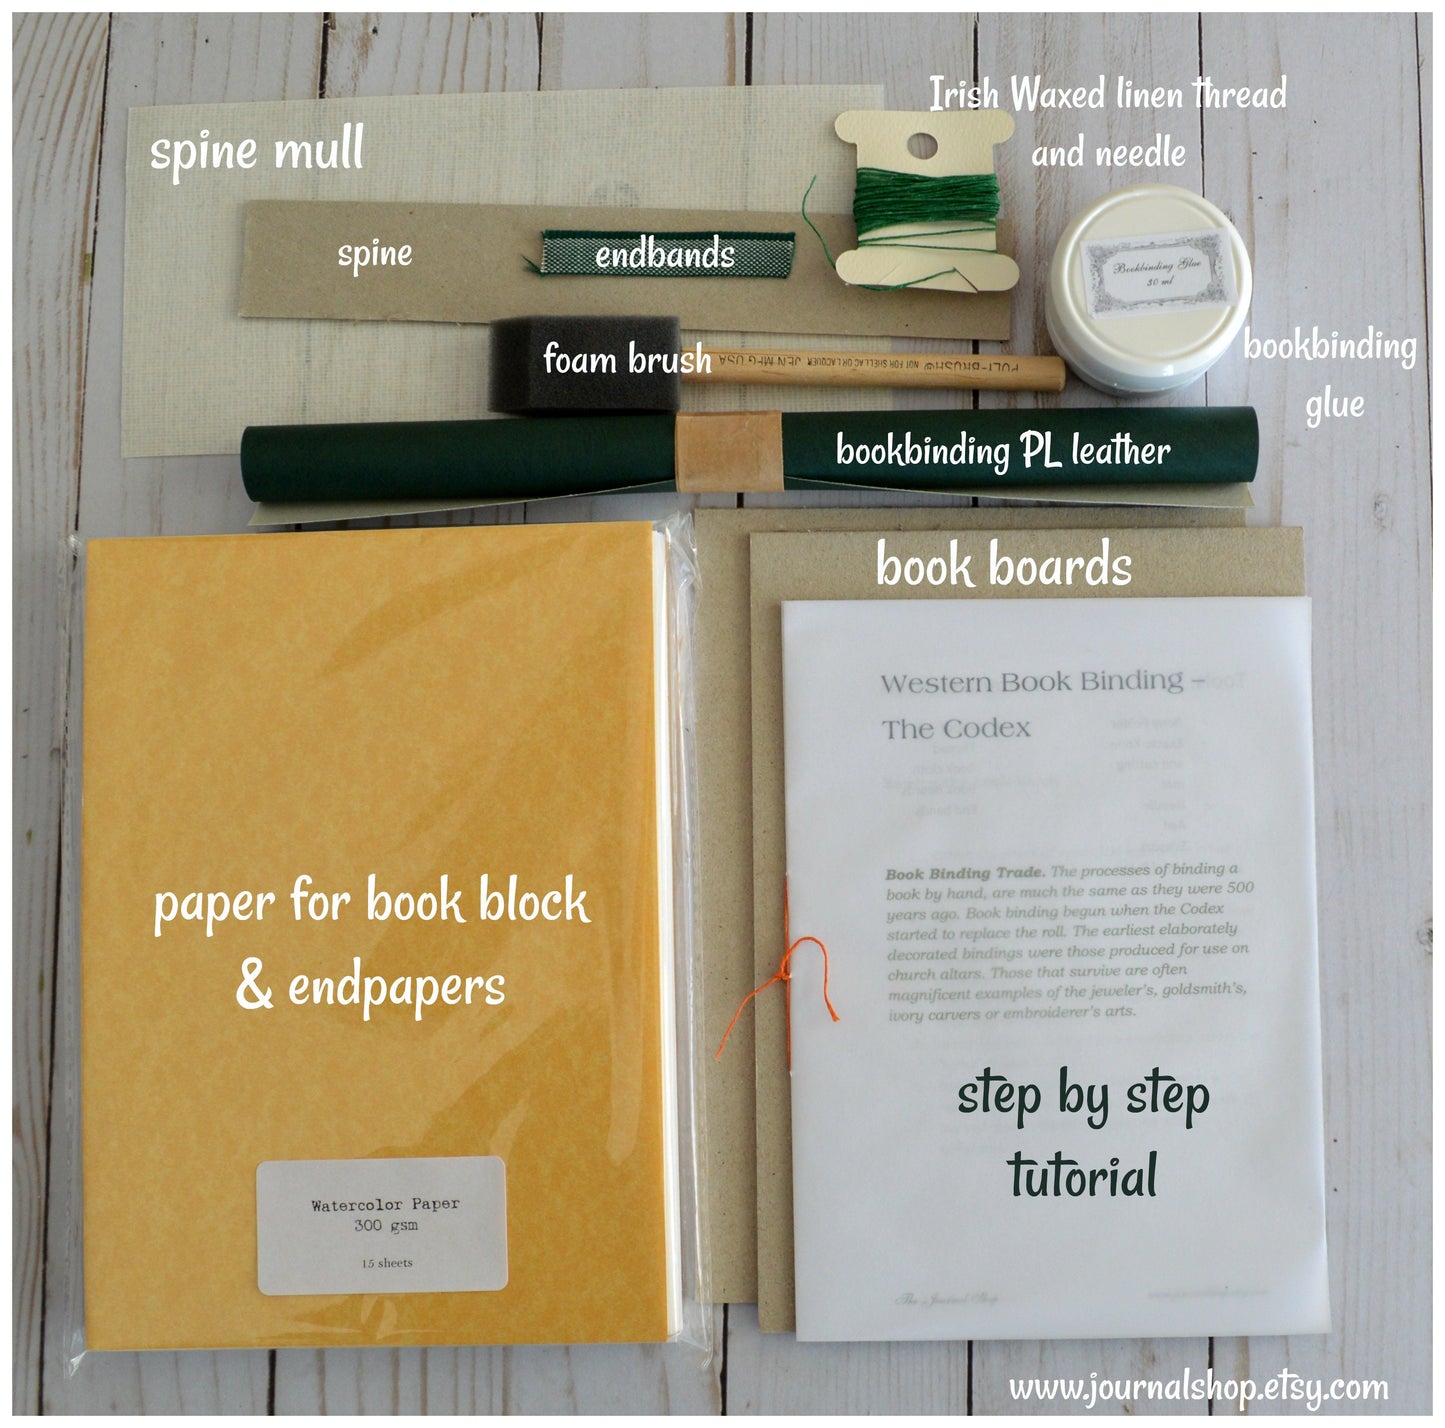 Complete Bookbinding Kit Make Your Own Journal Book With 